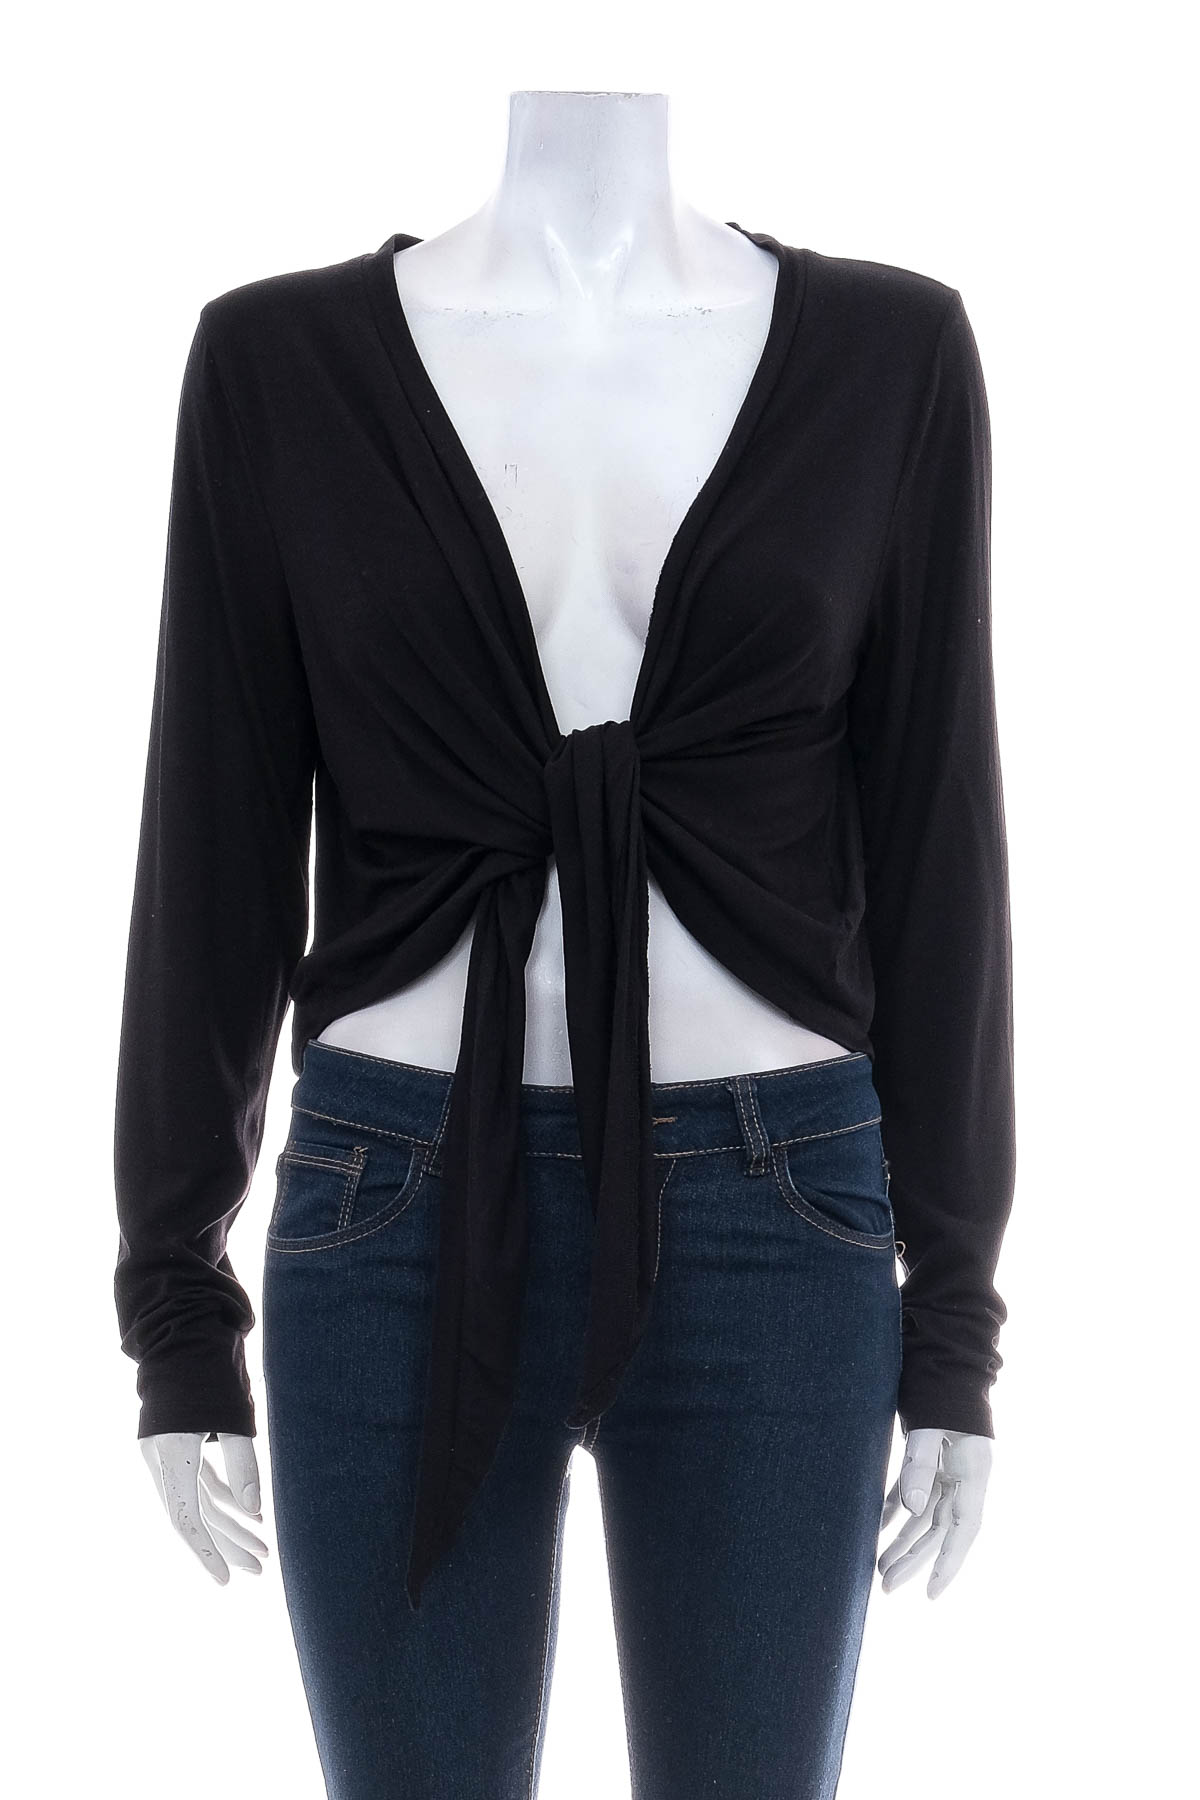 Women's cardigan - Active by Tchibo - 0